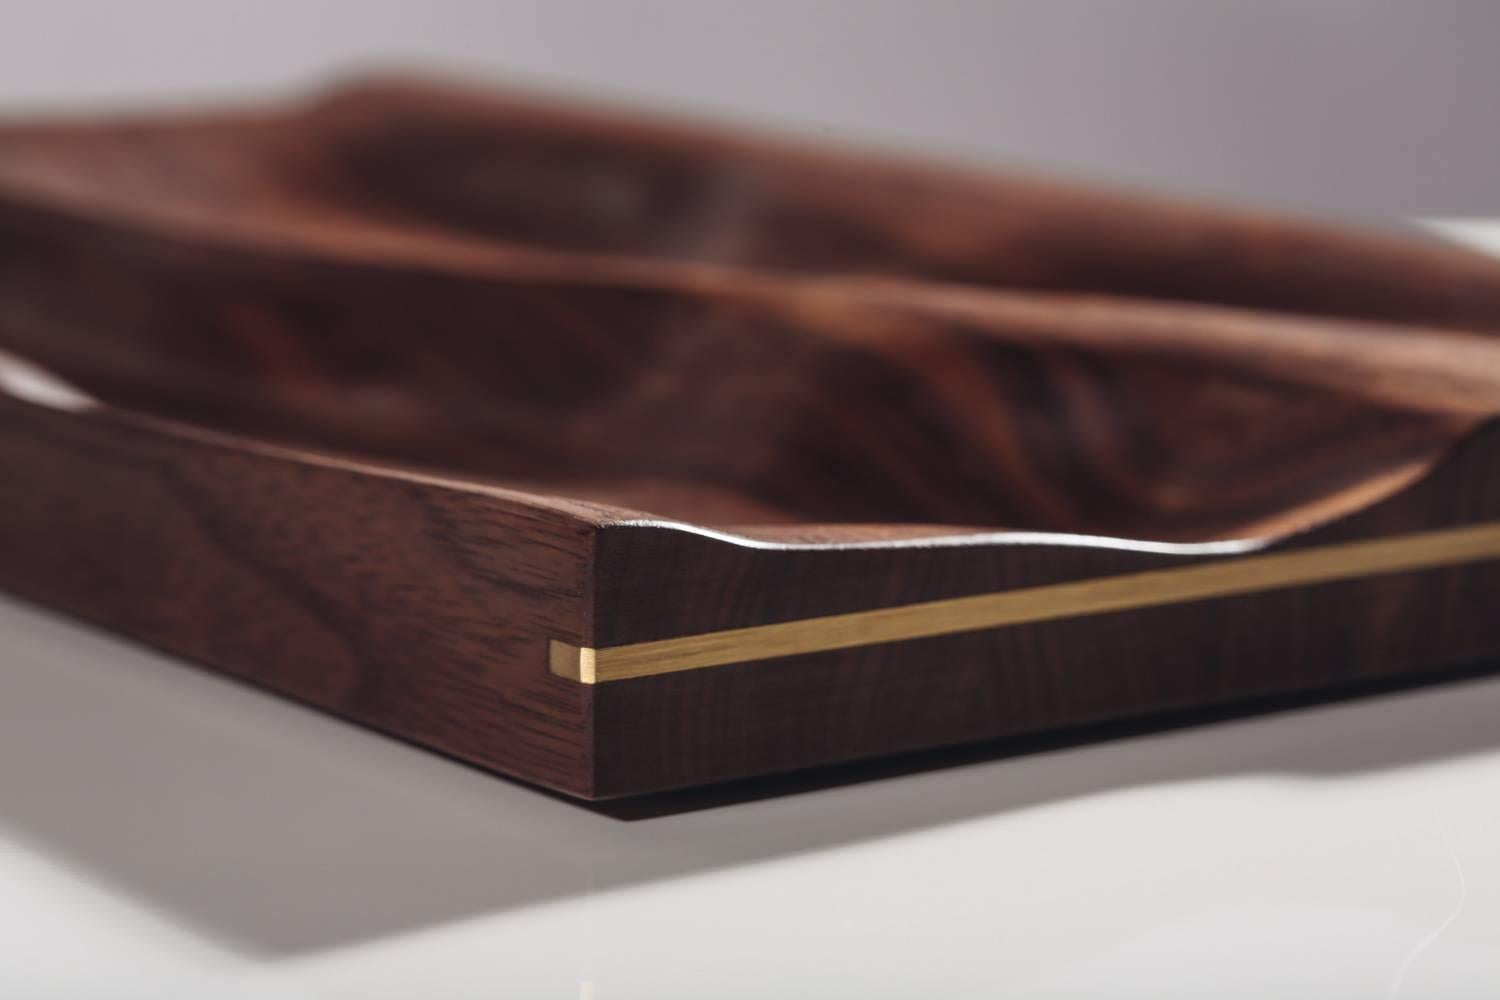 Contemporary tray by Vincent Pocsik

Carved walnut tray with natural finish.

Vincent Pocsik finds the balance between old and new fabrication techniques working in conjunction to find an anatomical form that creates its own presence. Series 001